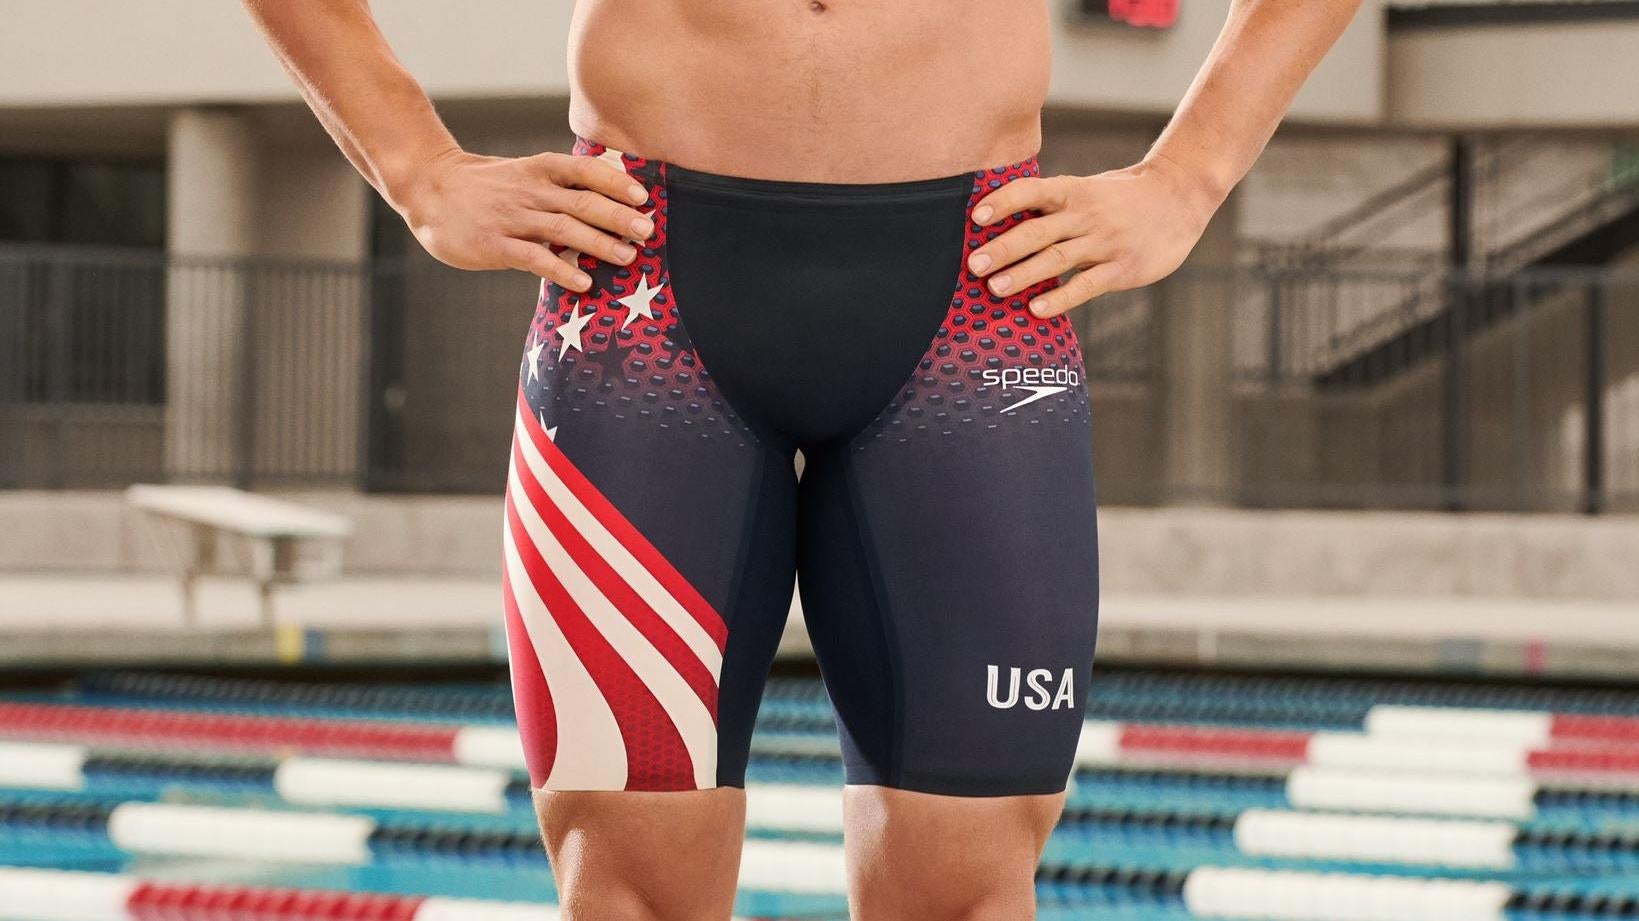 The Olympic version is a little weird, I gotta say. (Photo: Speedo)